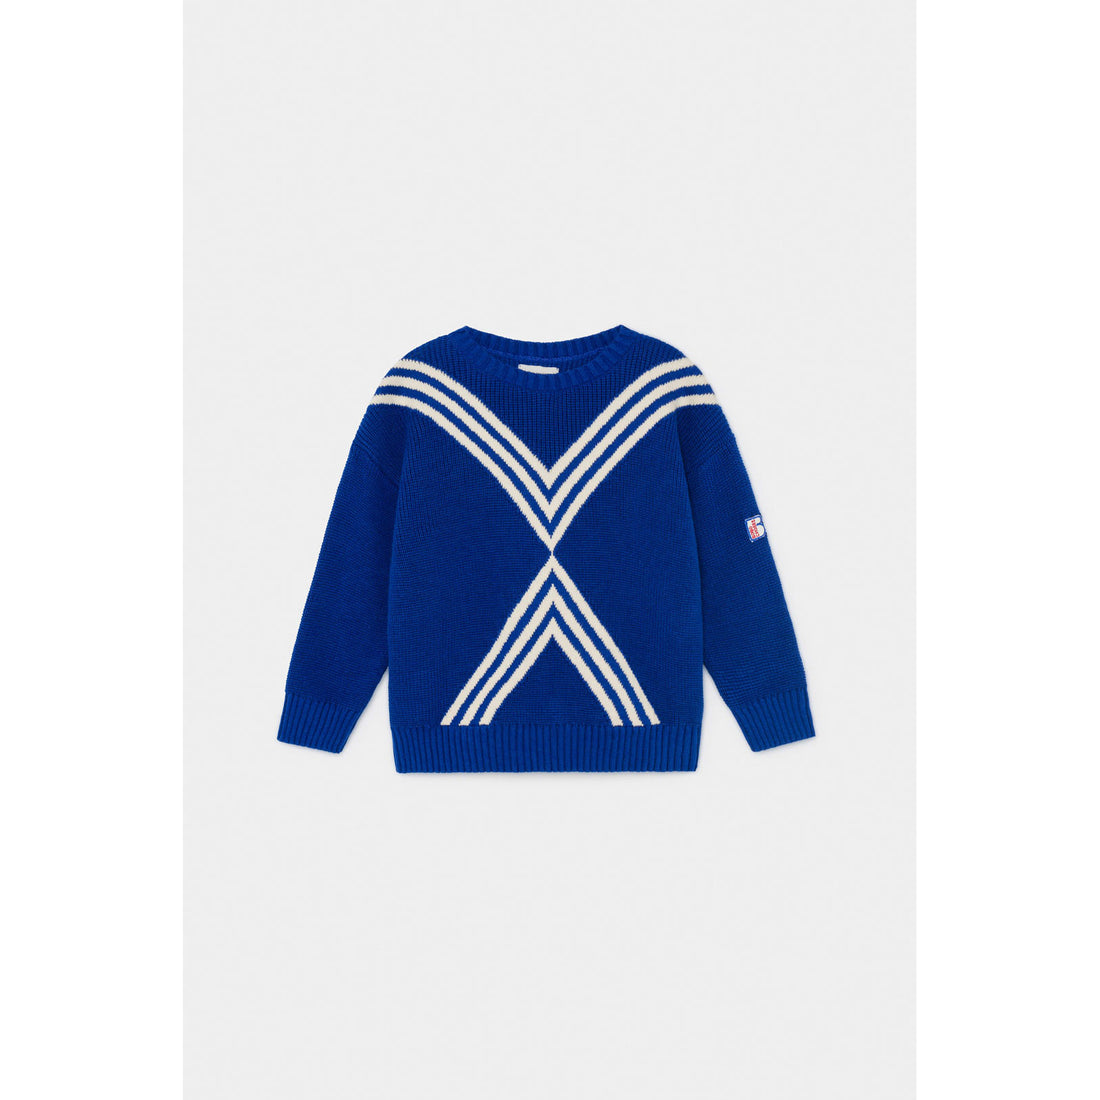 Bobo Choses Three Stripes Knitted Sweater